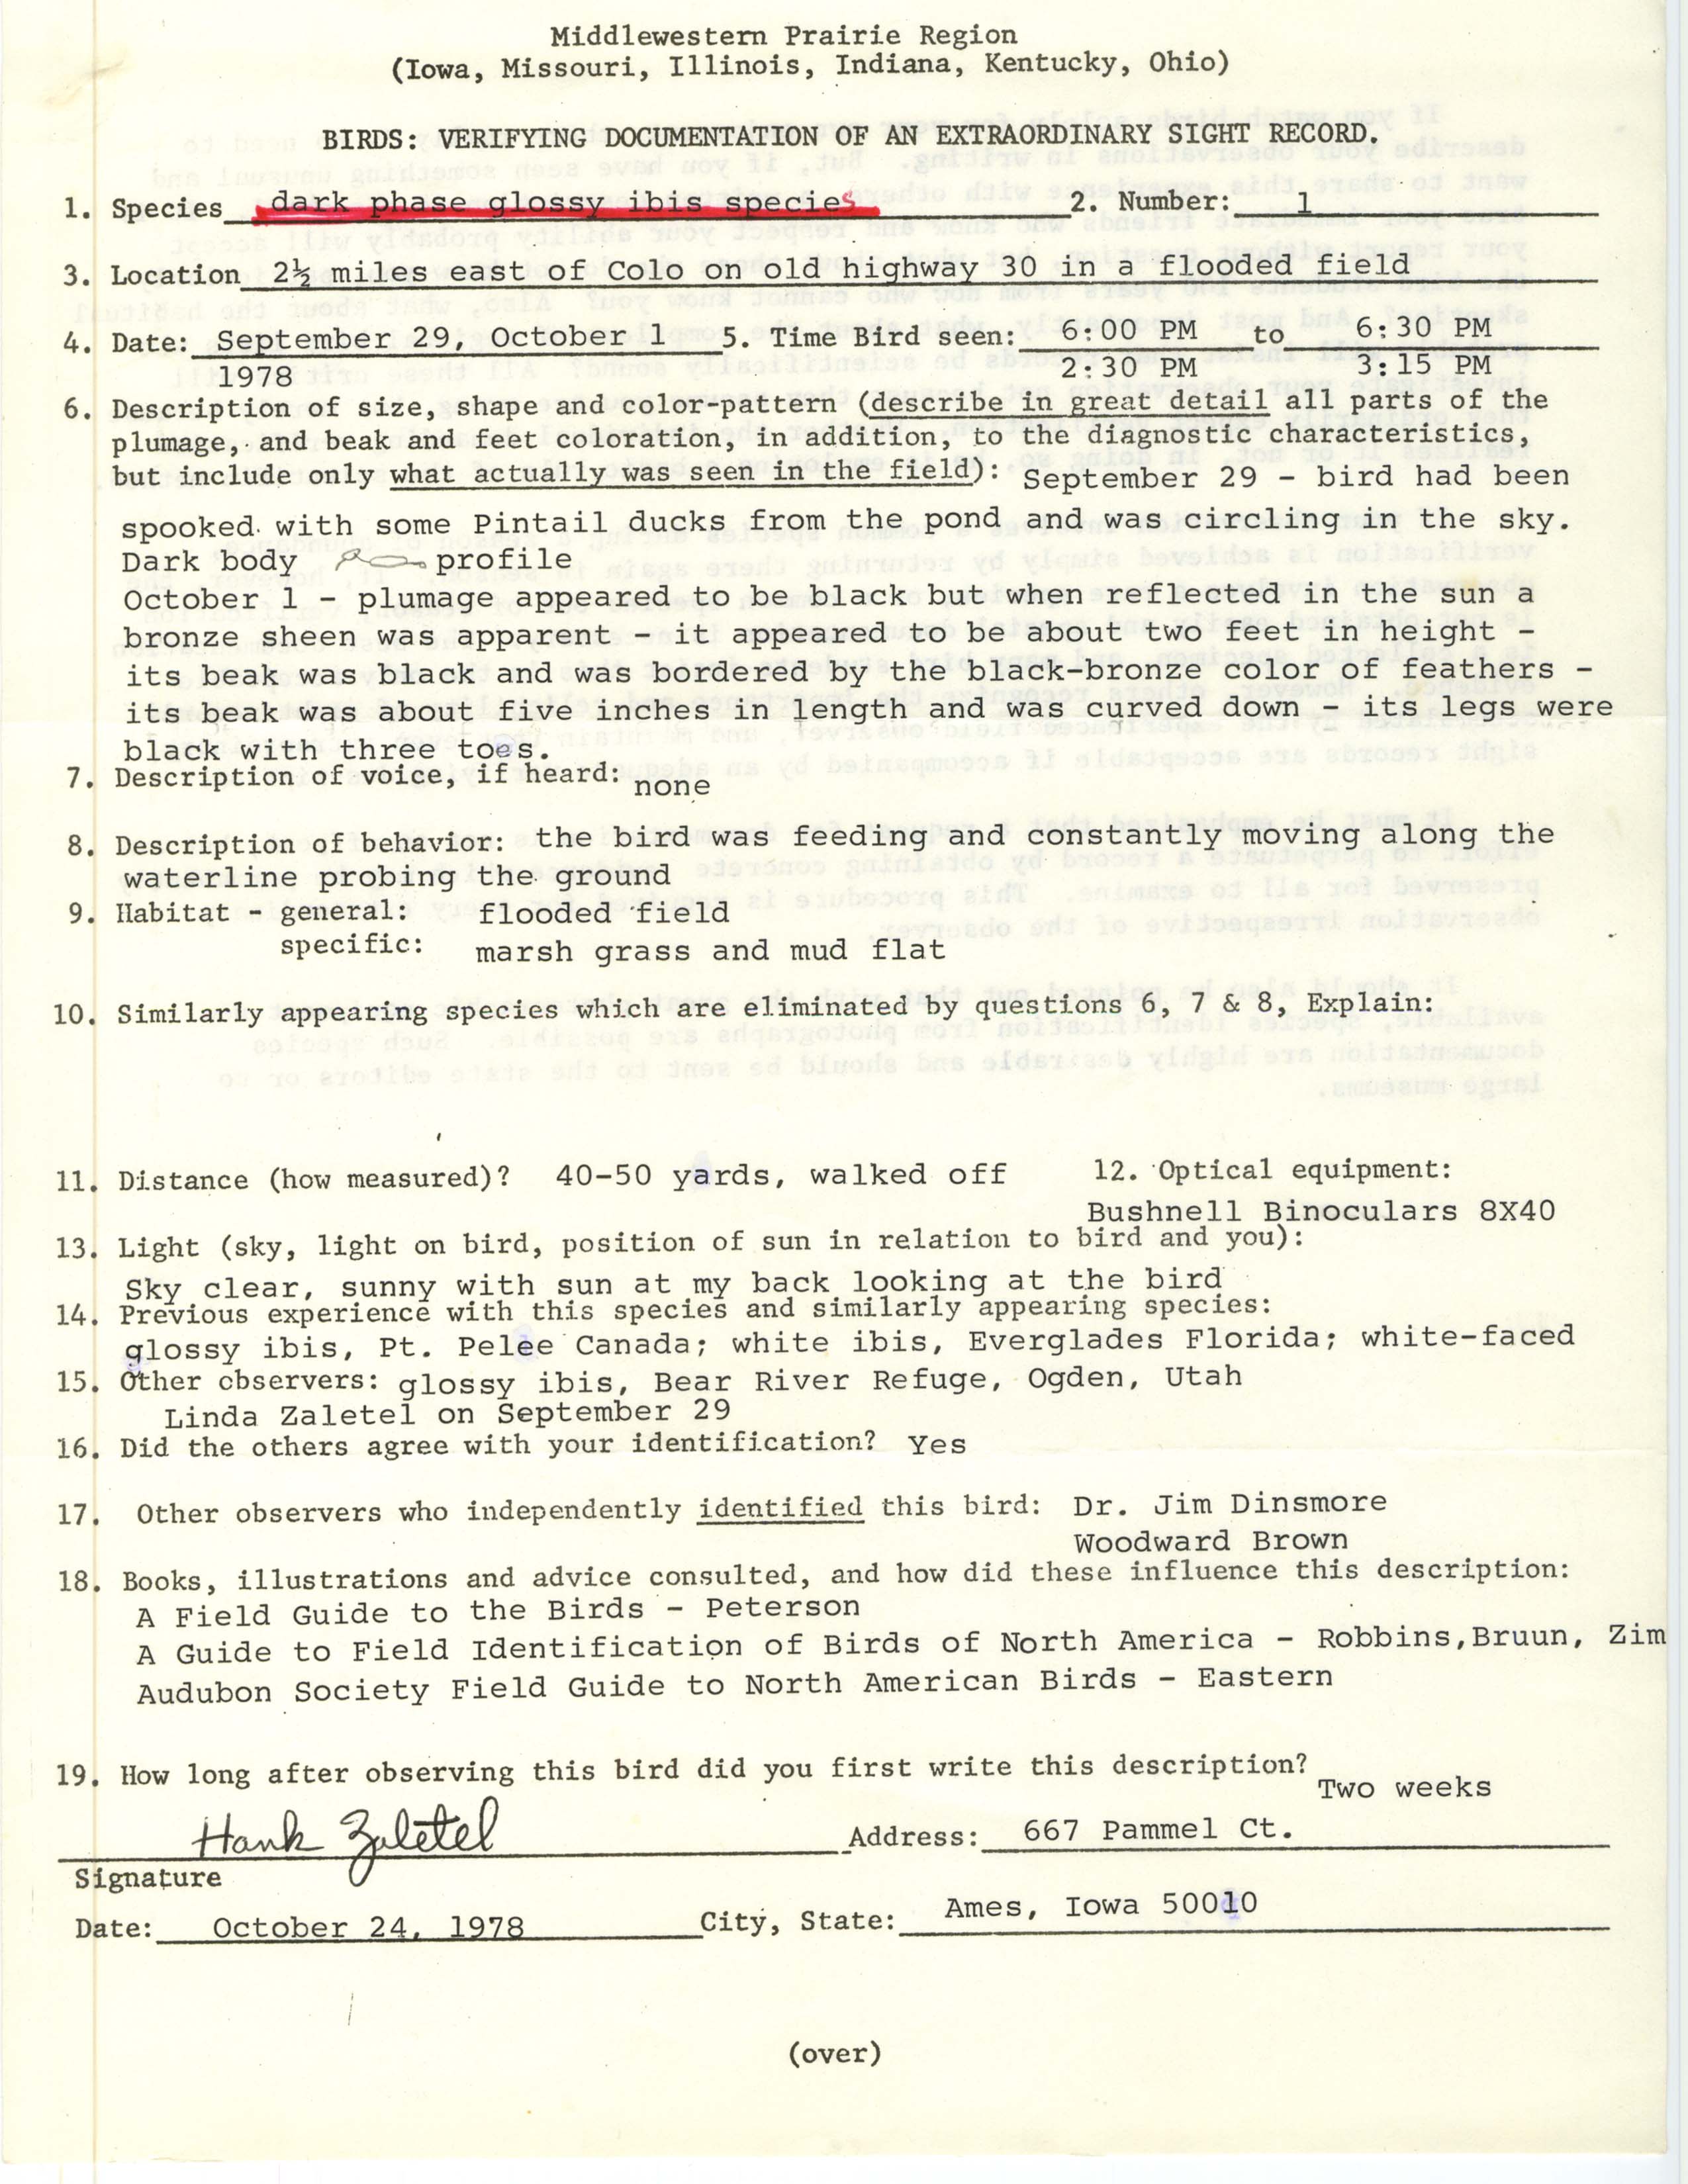 Rare bird documentation form for Ibis species at Colo, 1978